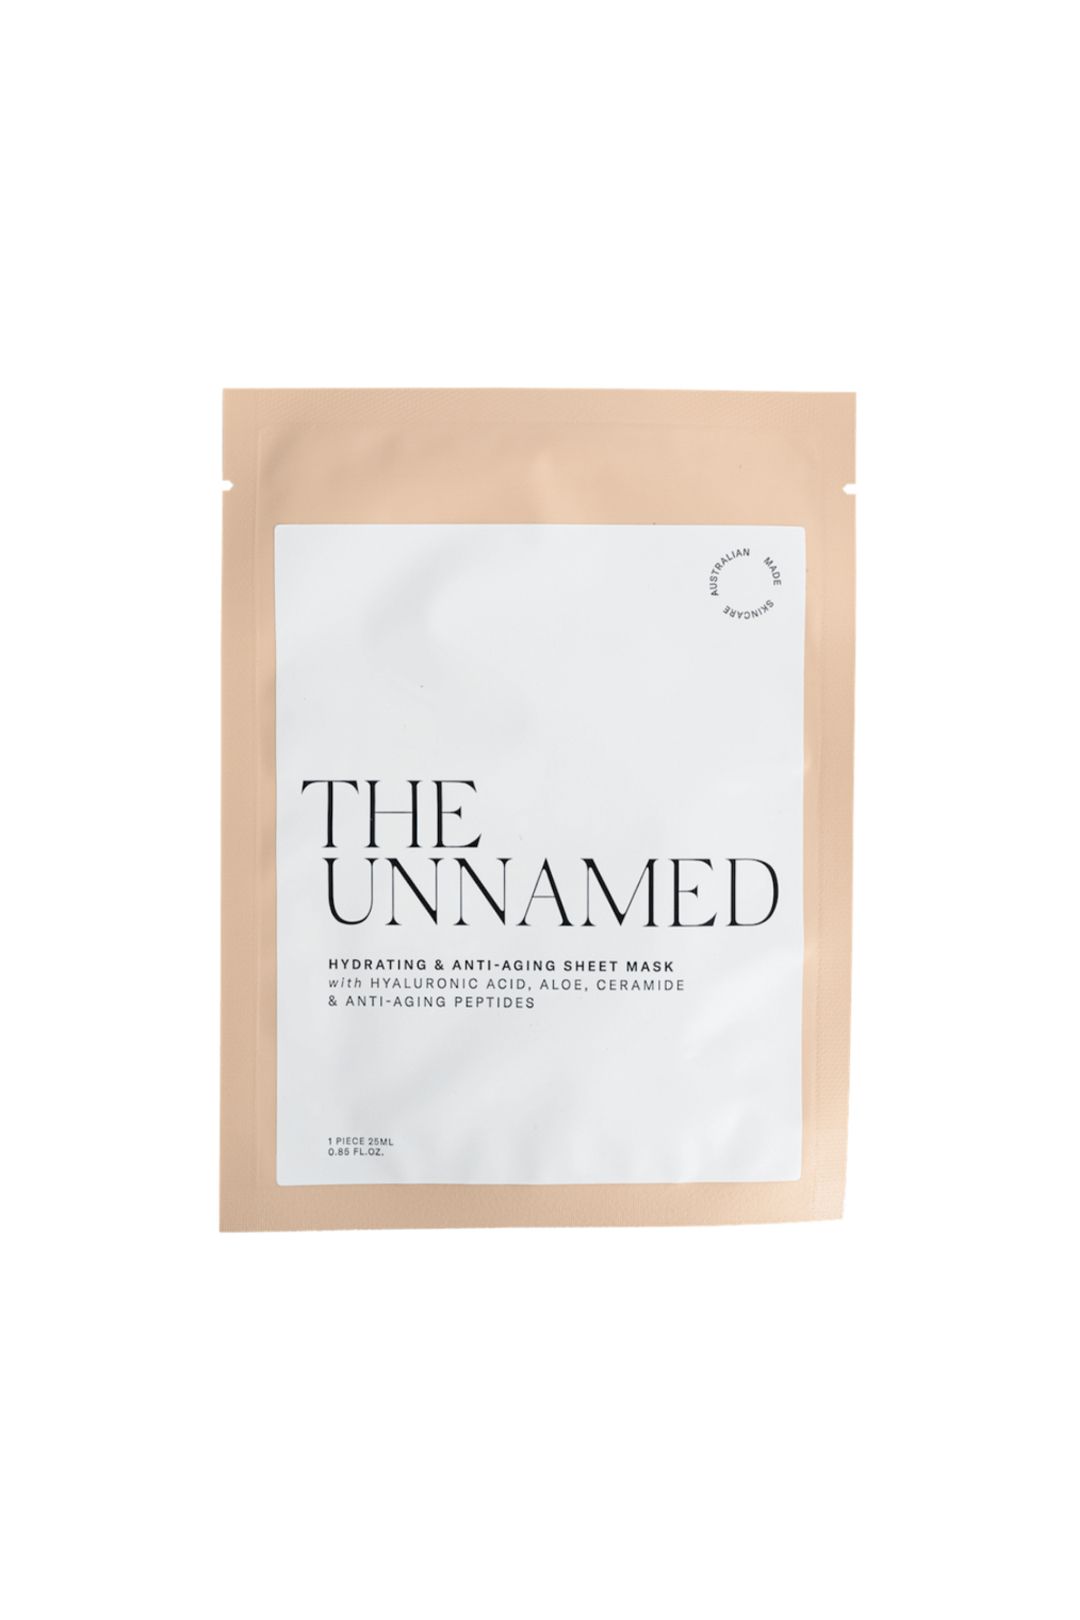 theunnamed-hydrating-anti-aging-sheet-mask-front